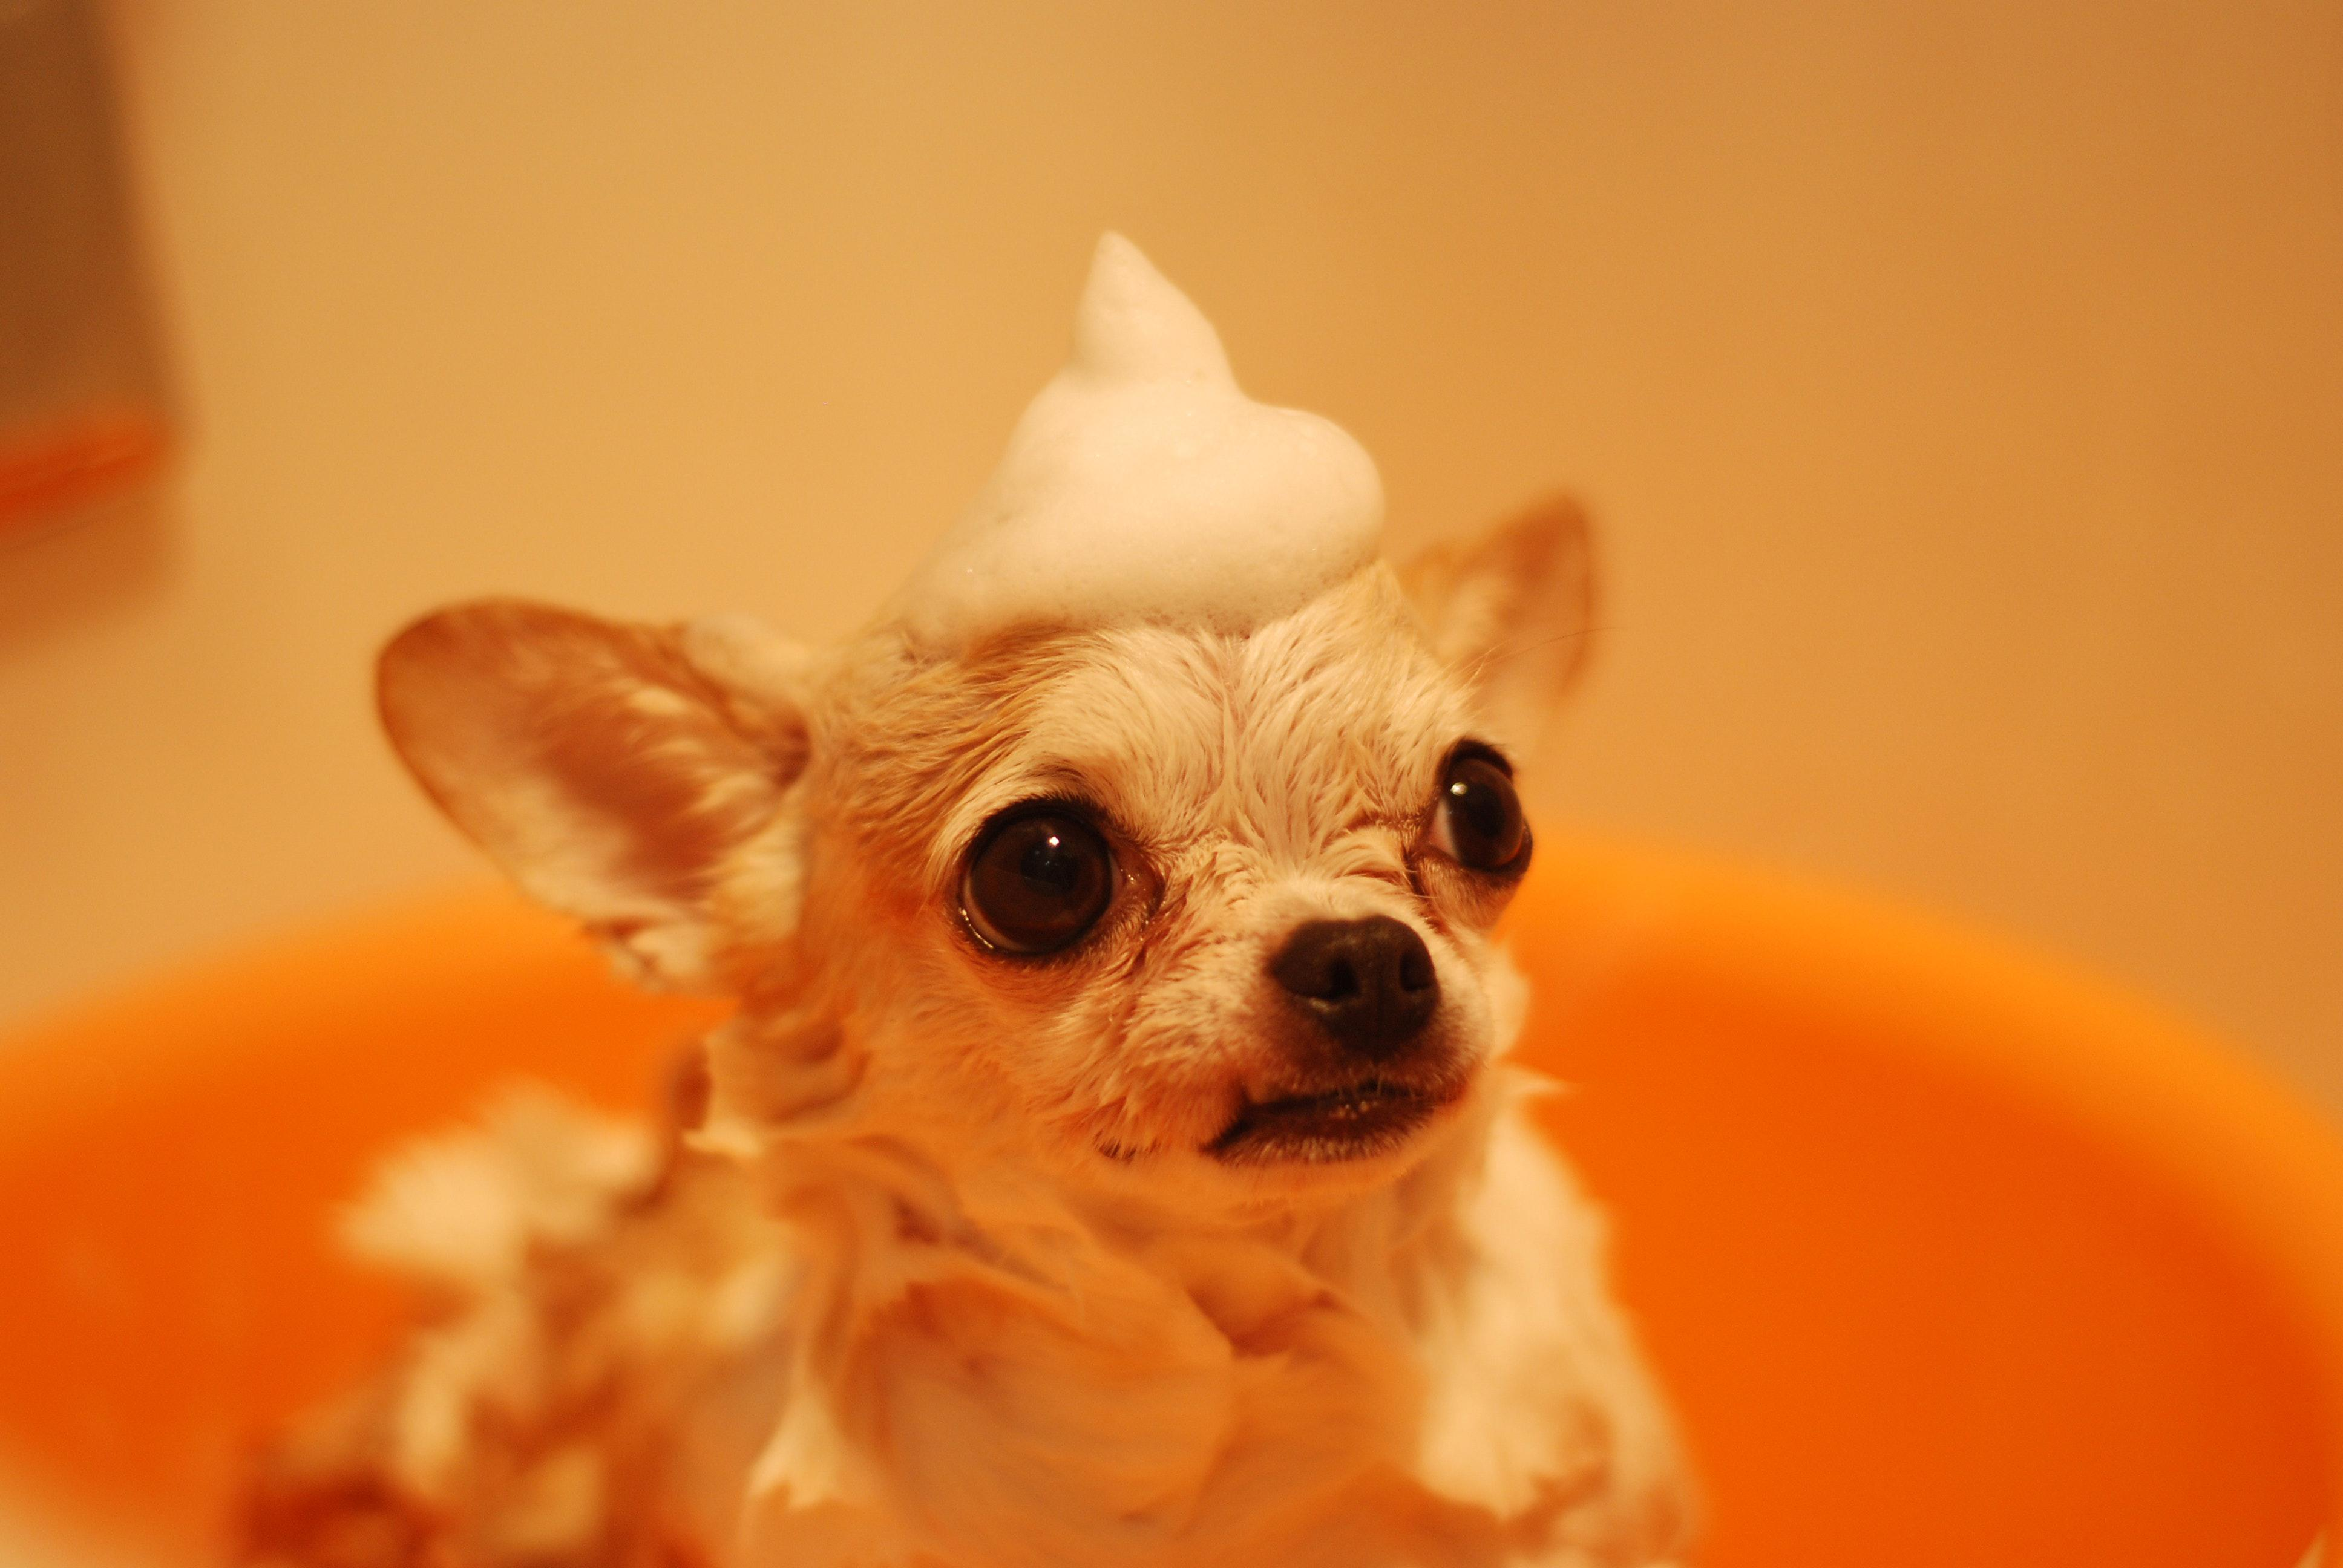 The Sweet Treat Can Chihuahuas Enjoy Peanut Butter? PetWah